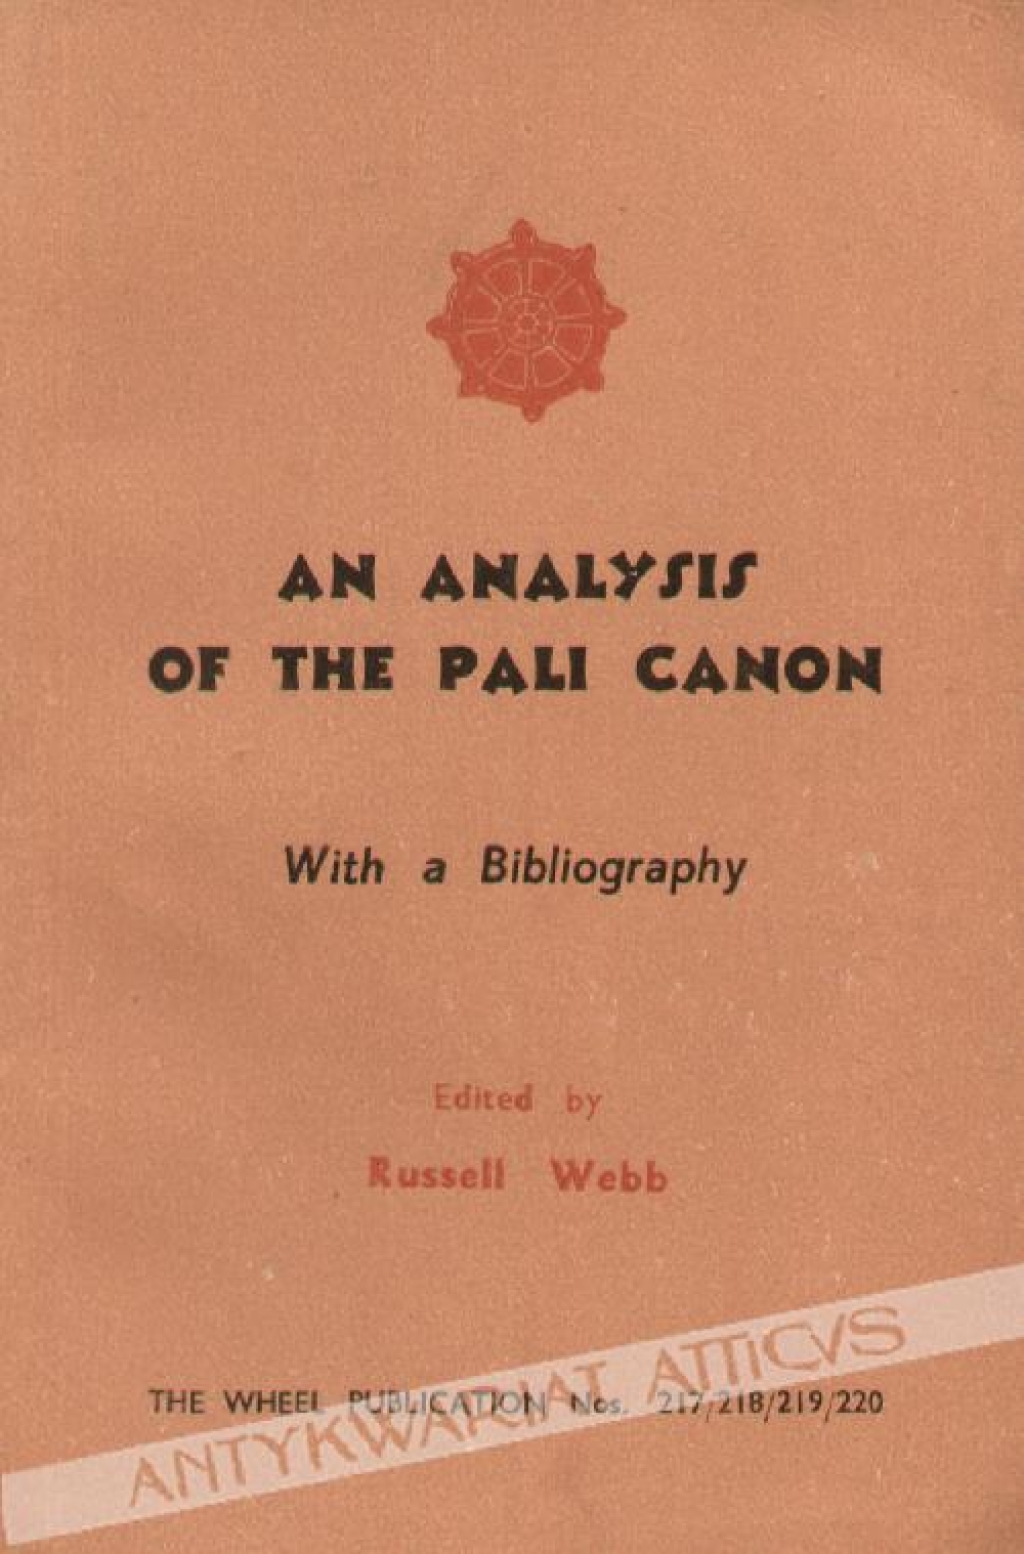 An analysis of the Pali canon being the Buddhist Scriptures of the Theravada School